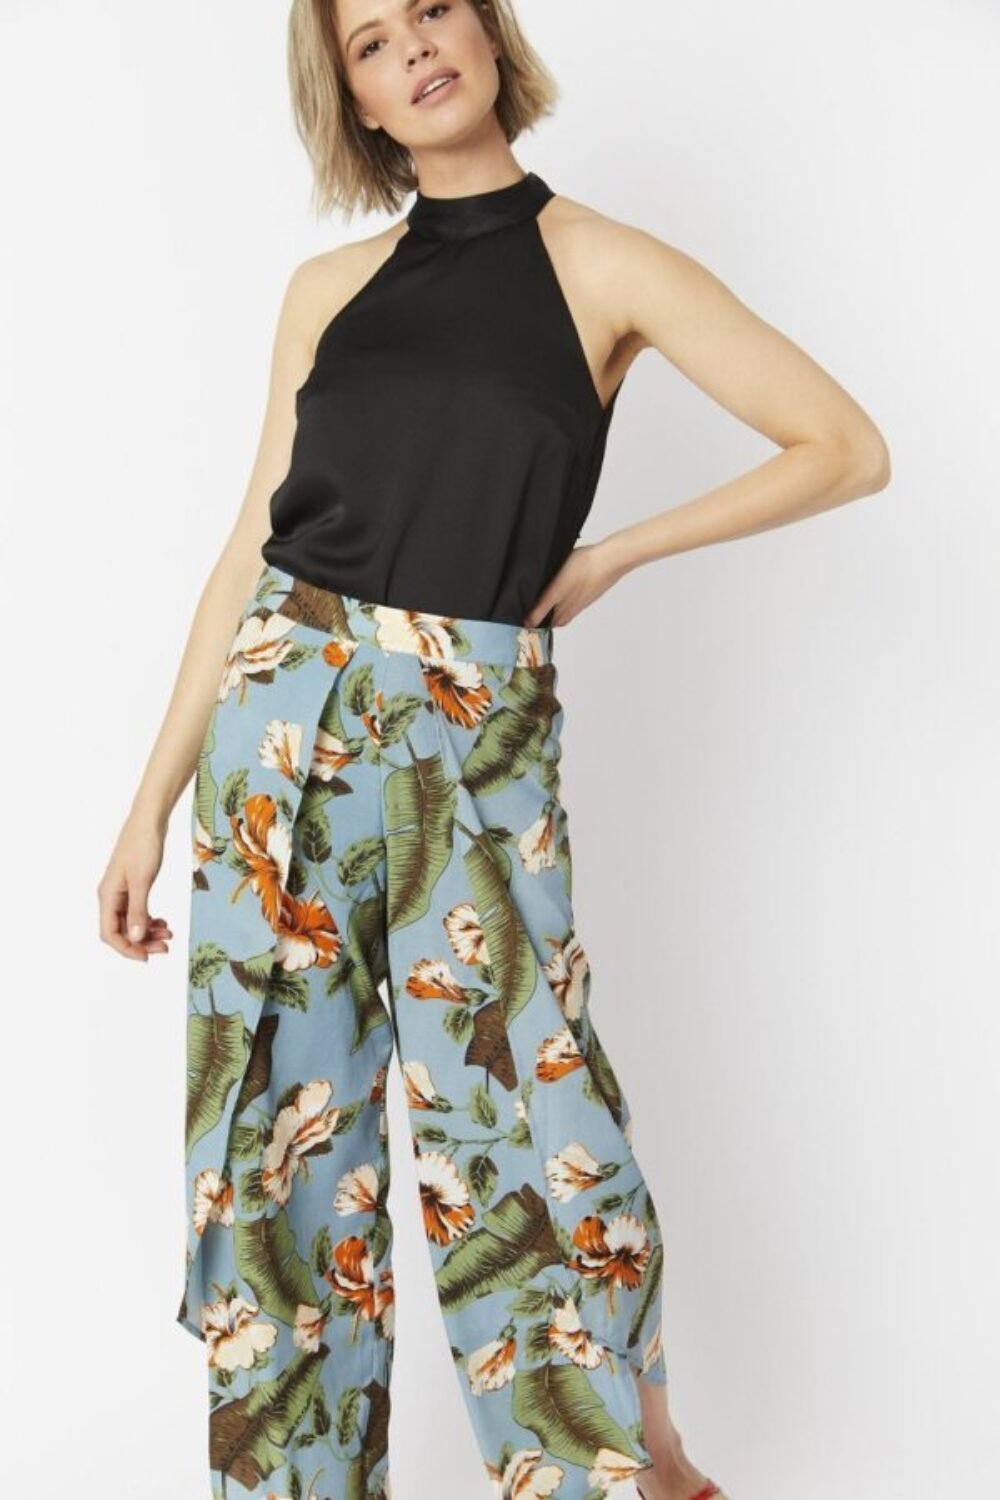 Shop Multi Silk Blend Tropical Open Front Wide Leg Trousers and women's luxury and designer clothes at www.lux-apparel.co.uk